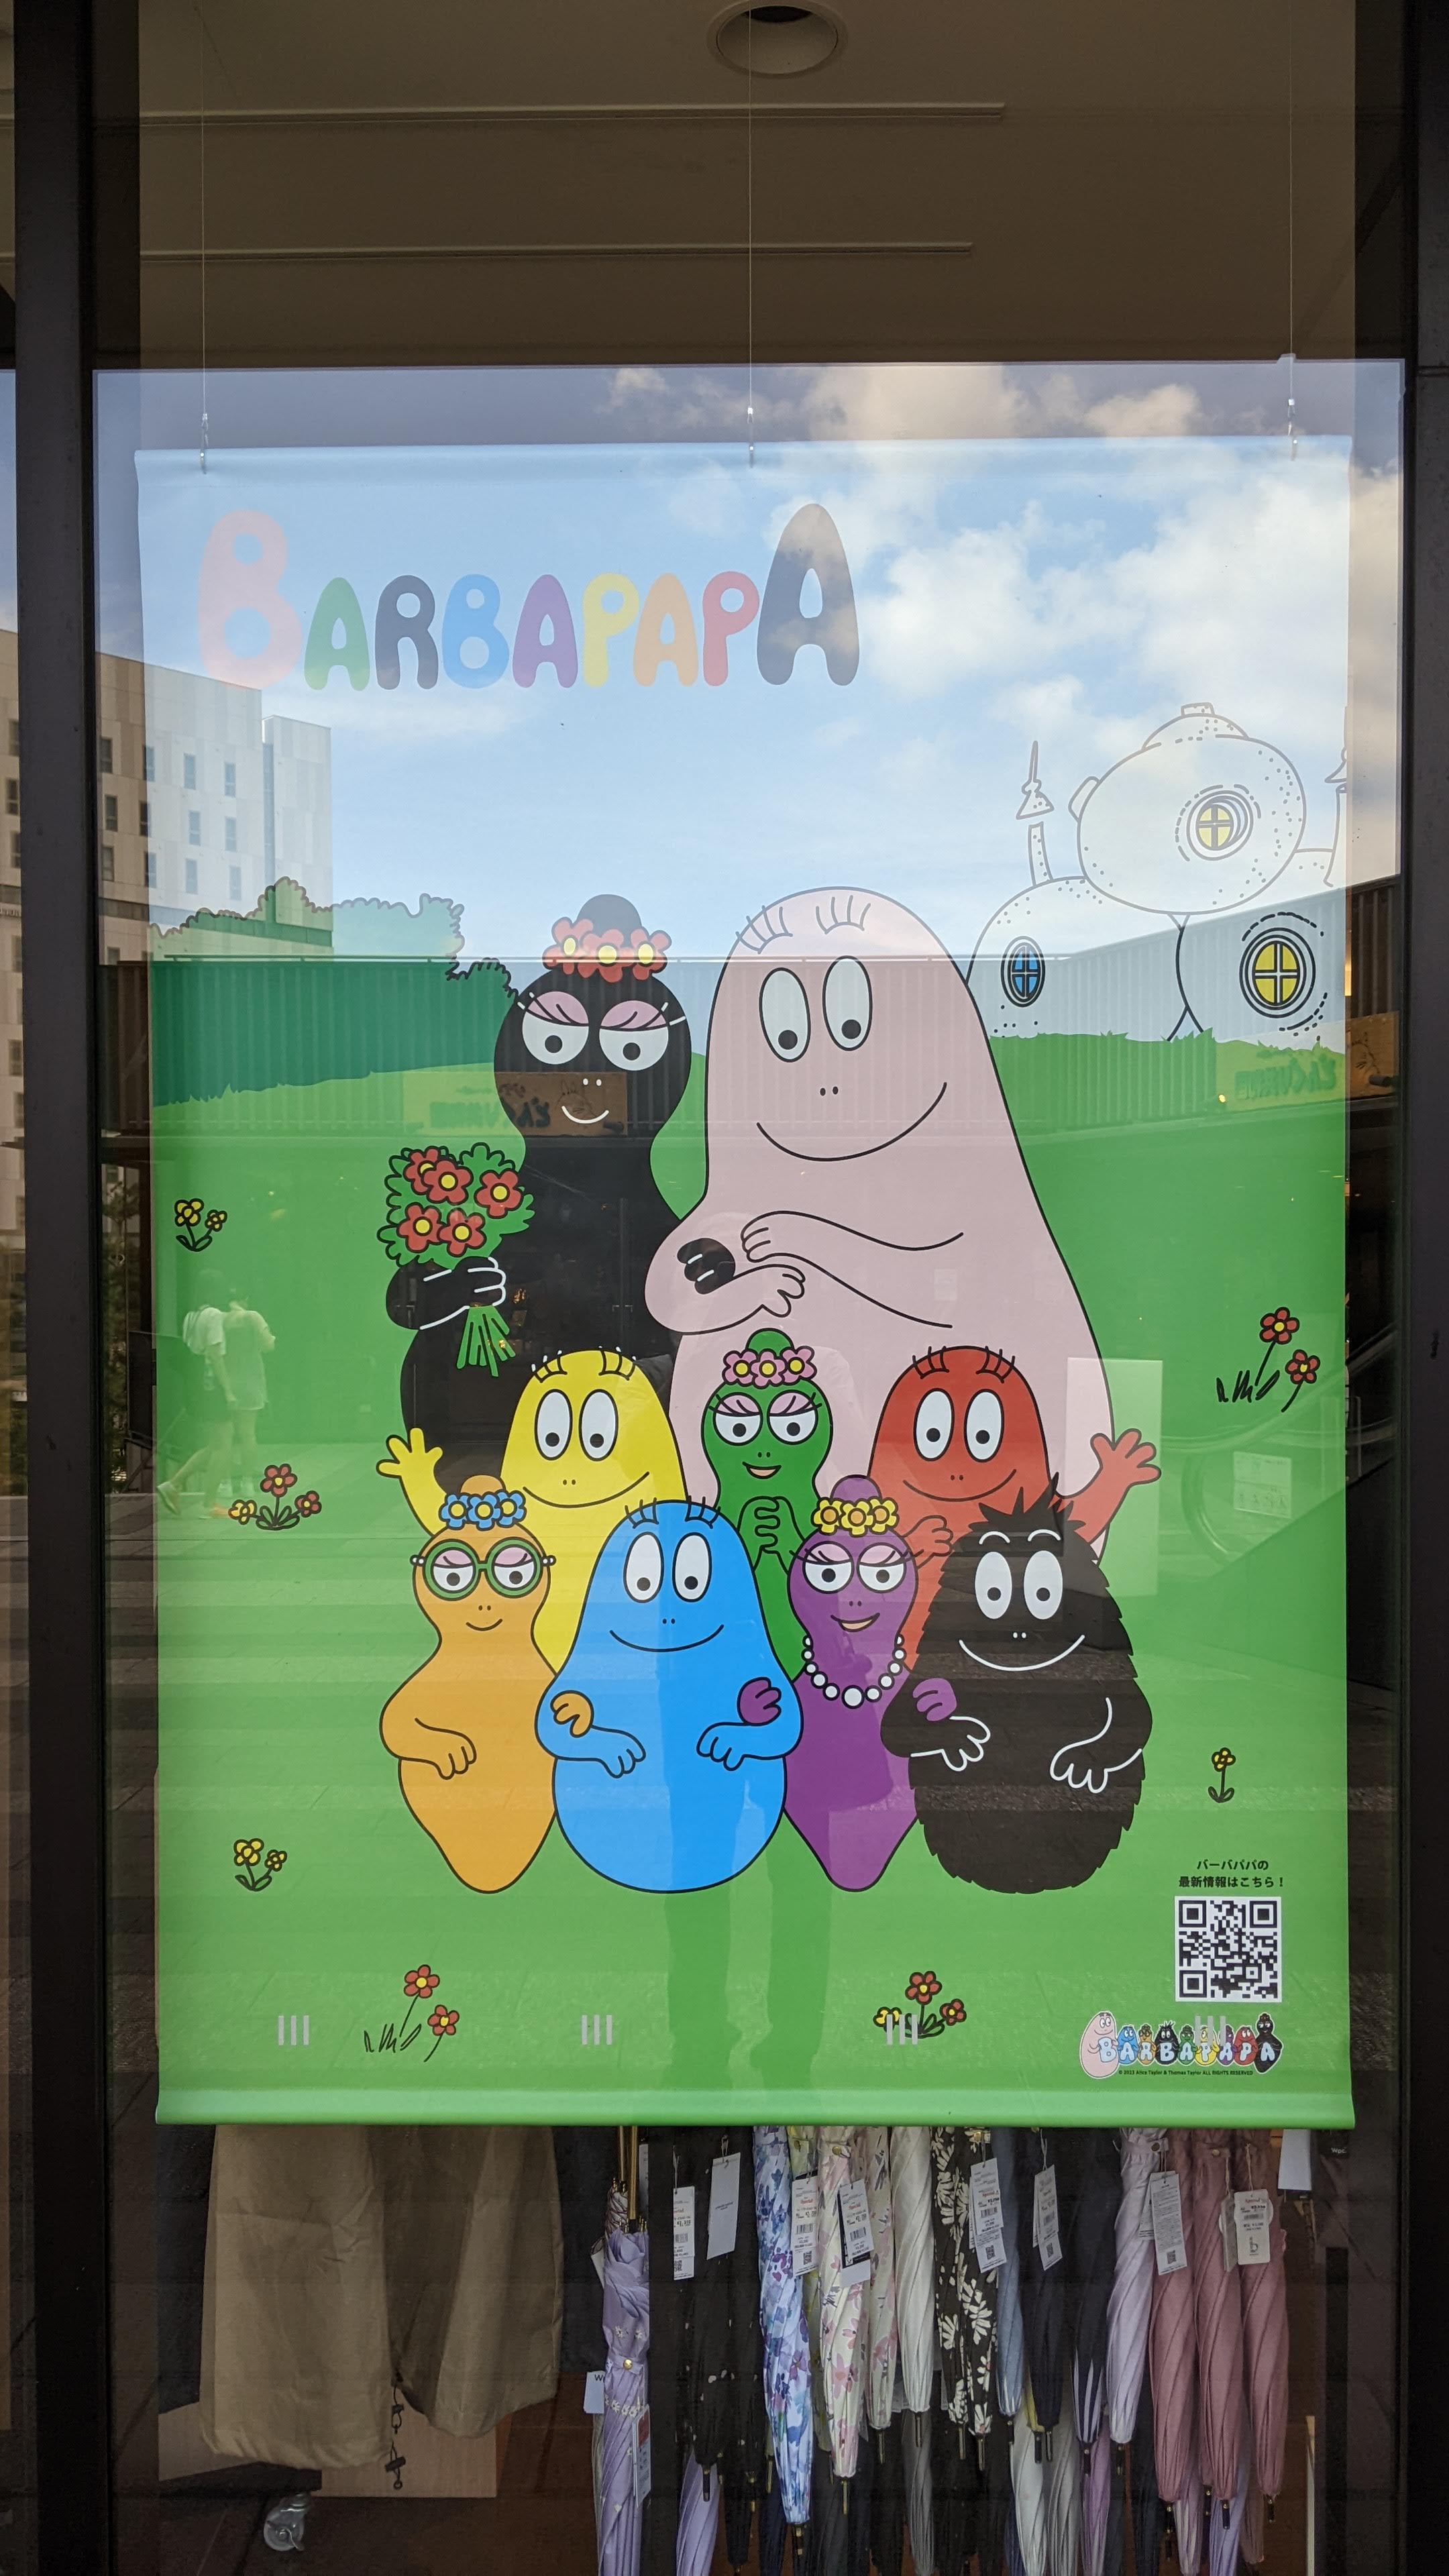 A poster featuring the Barbapapa family